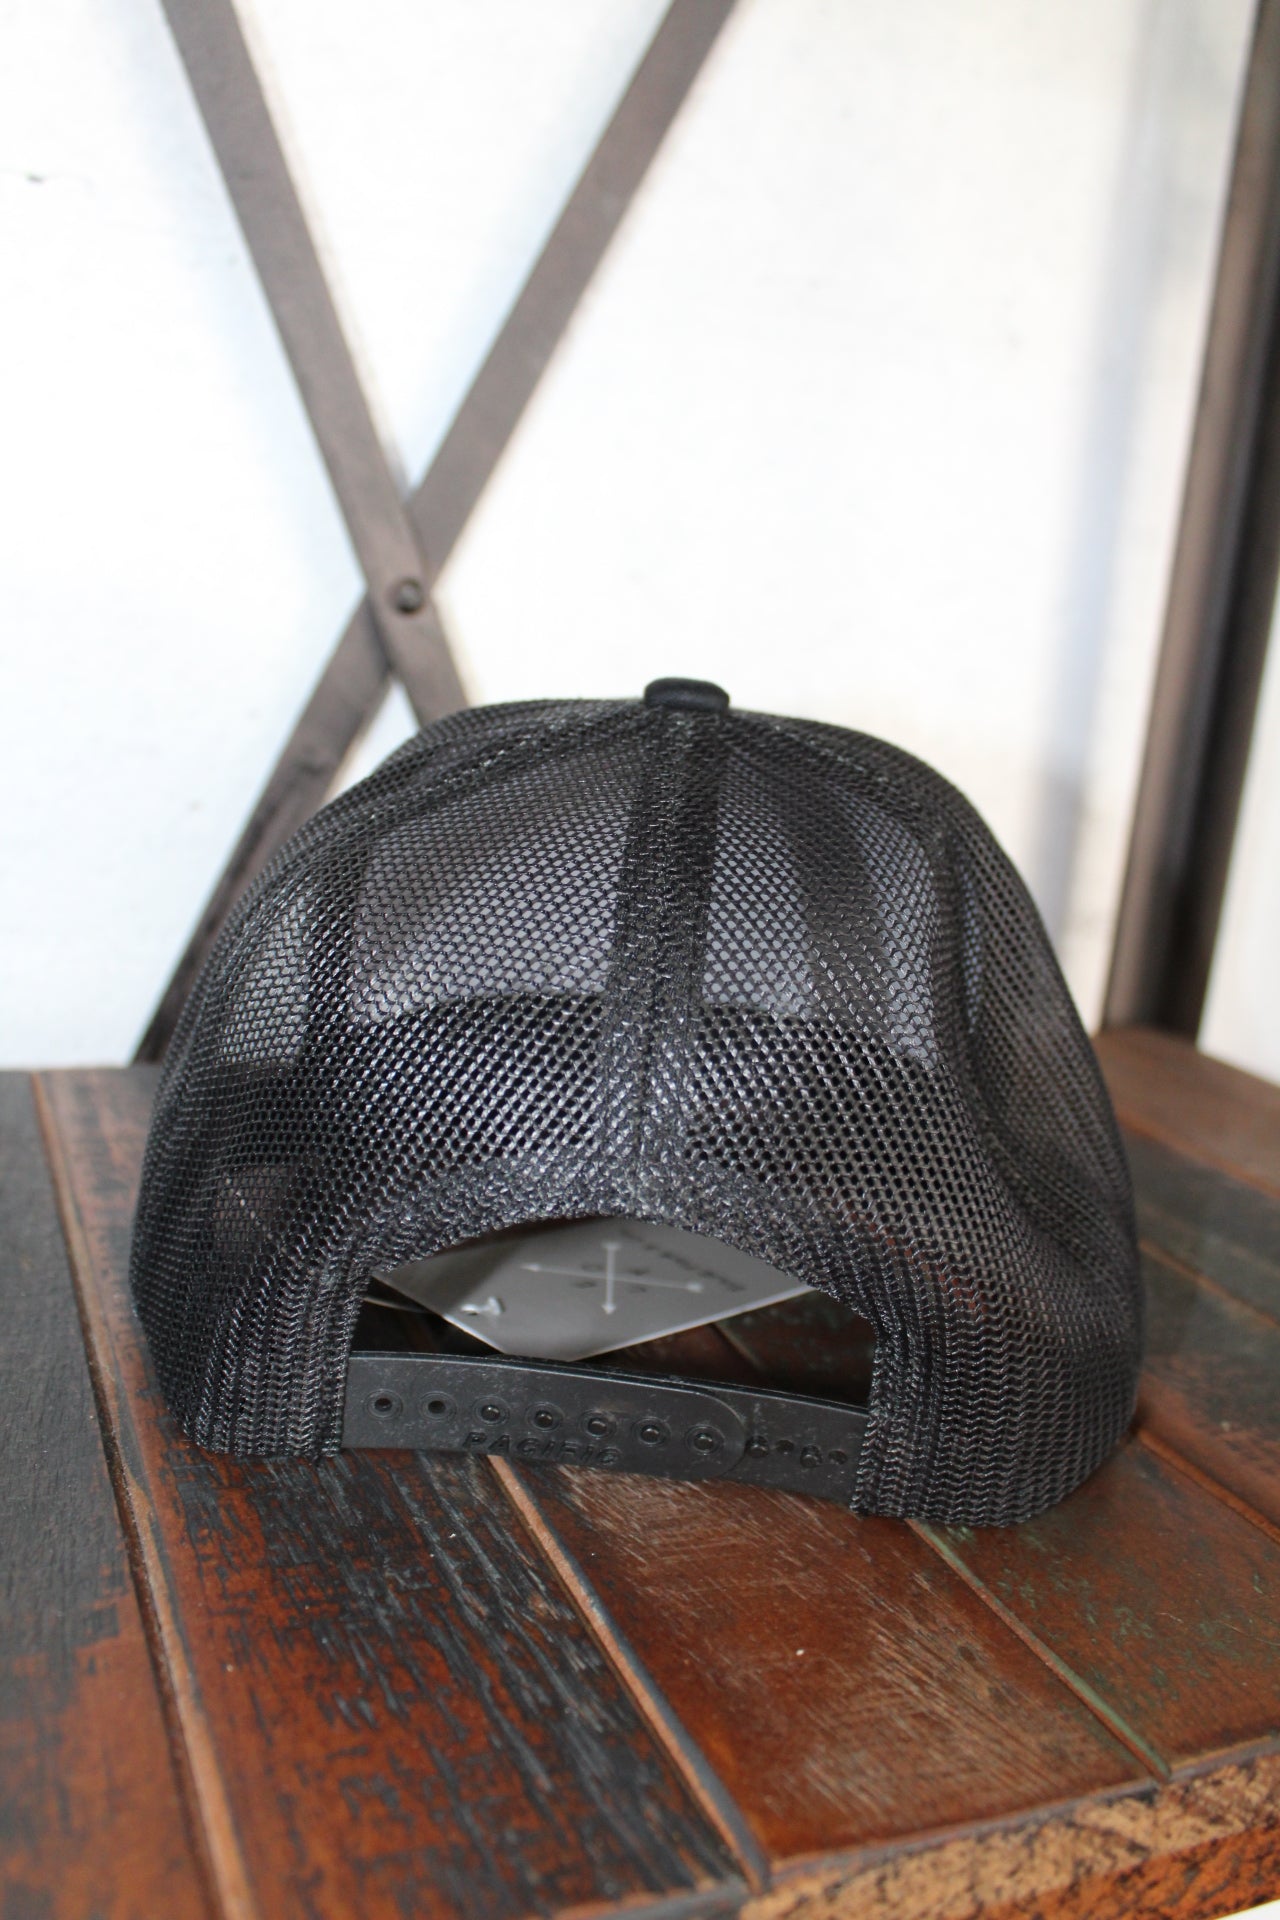 Arch Leather Patch Trucker Hat